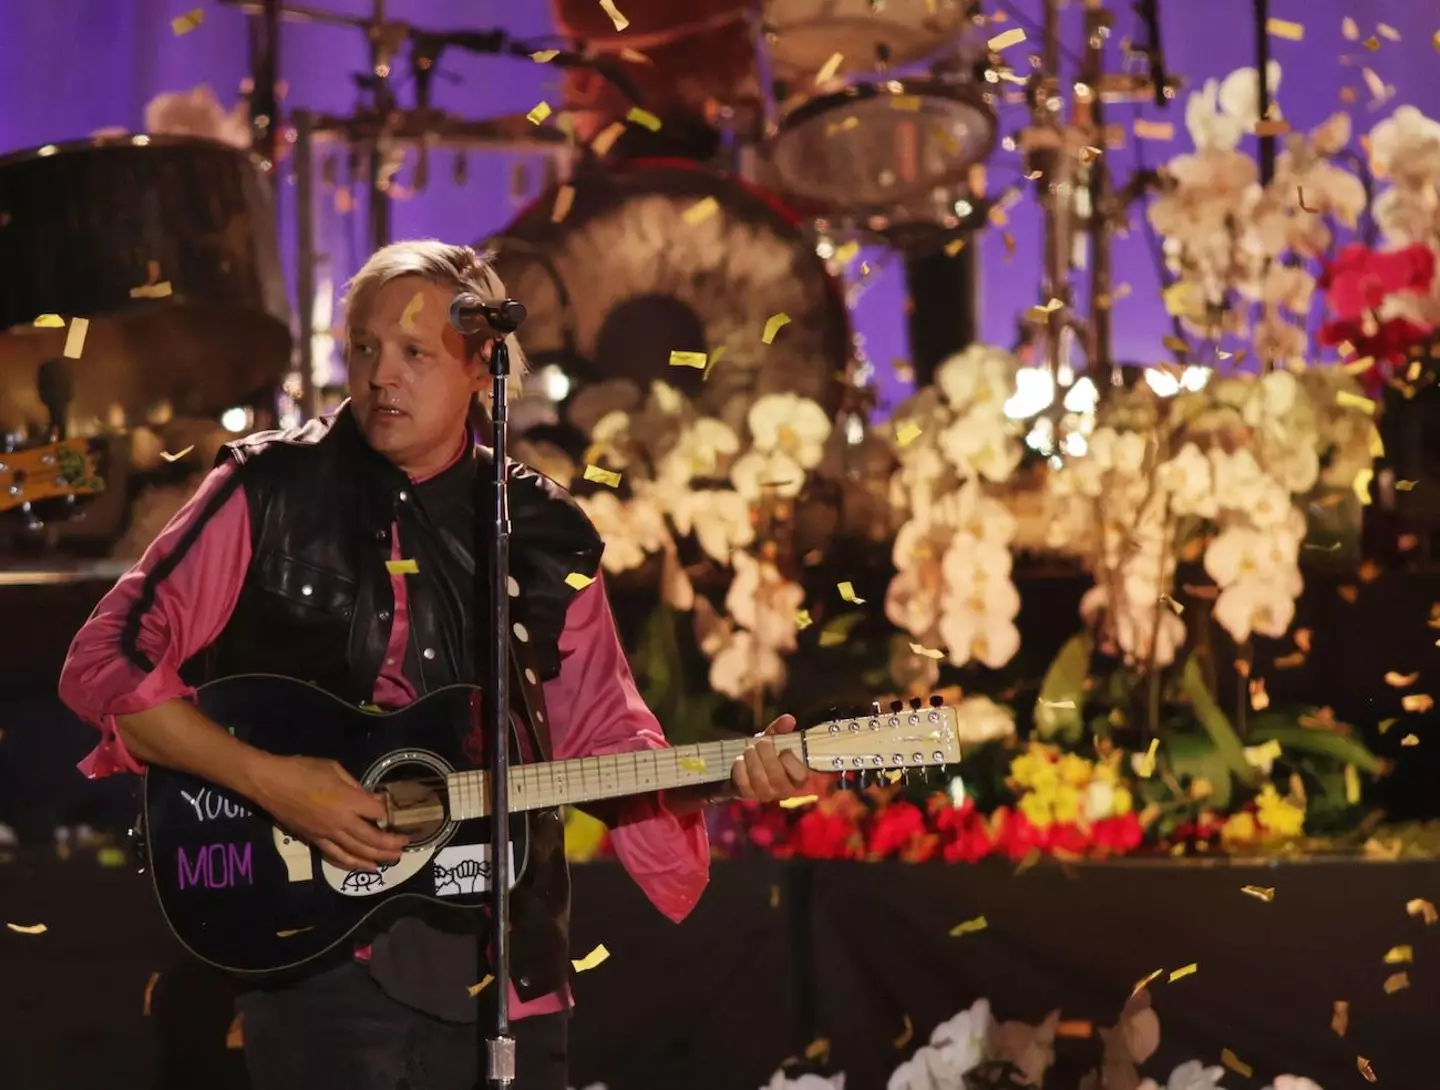 Arcade Fire singer Win Butler has denied involvement in the multiple sexual misconduct allegations made against him.